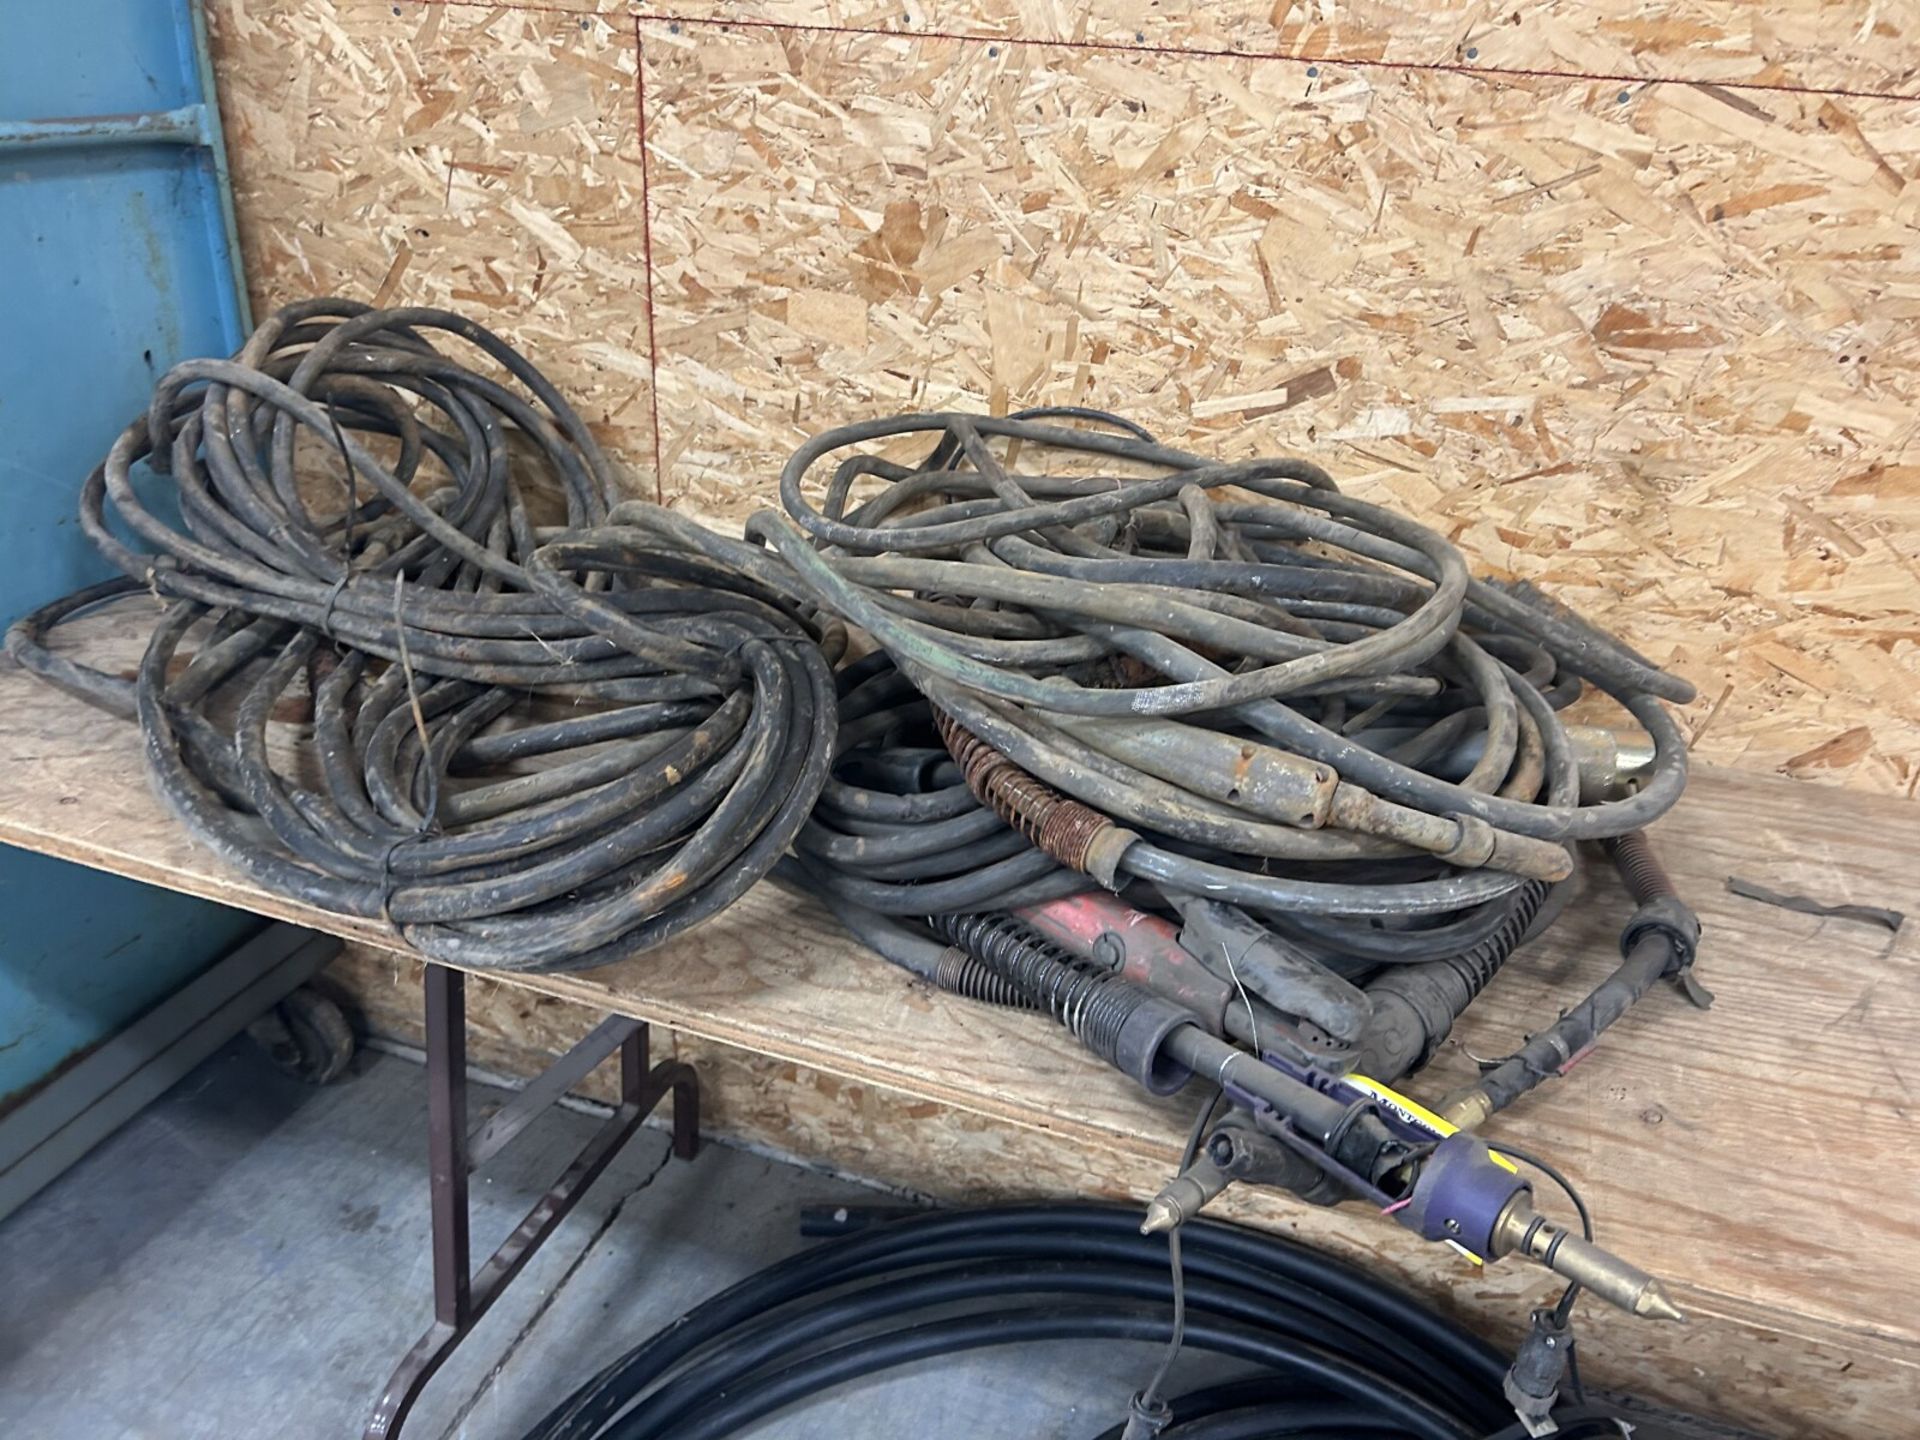 ASSORTED WELDING CABLES & GROUND CABLE